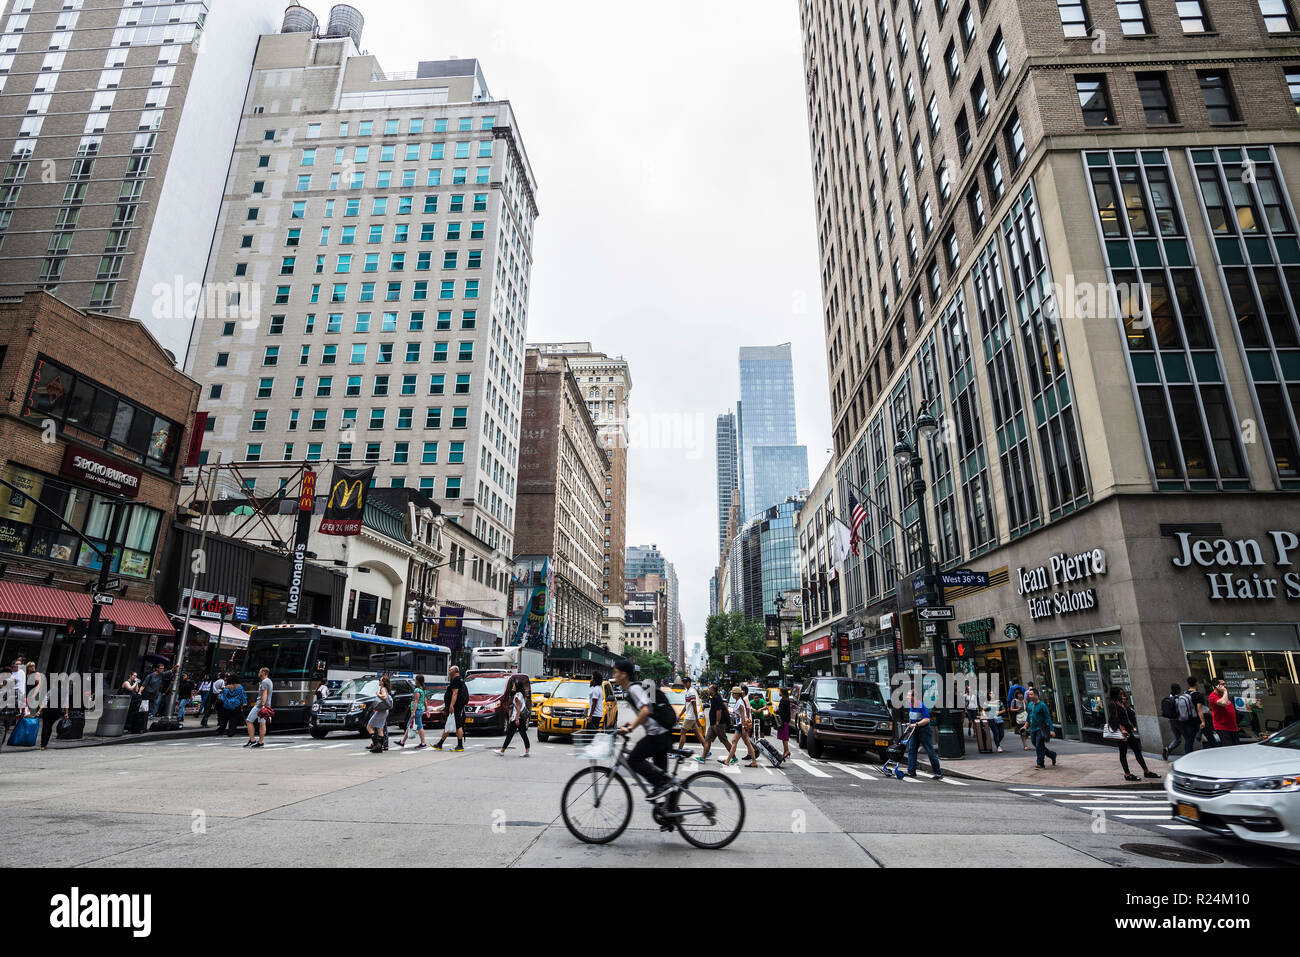 New York City, USA - July 25, 2018: Sixth Avenue (6th Avenue) – officially Avenue of the Americas - with people and cyclist around and traffic in Manh Stock Photo